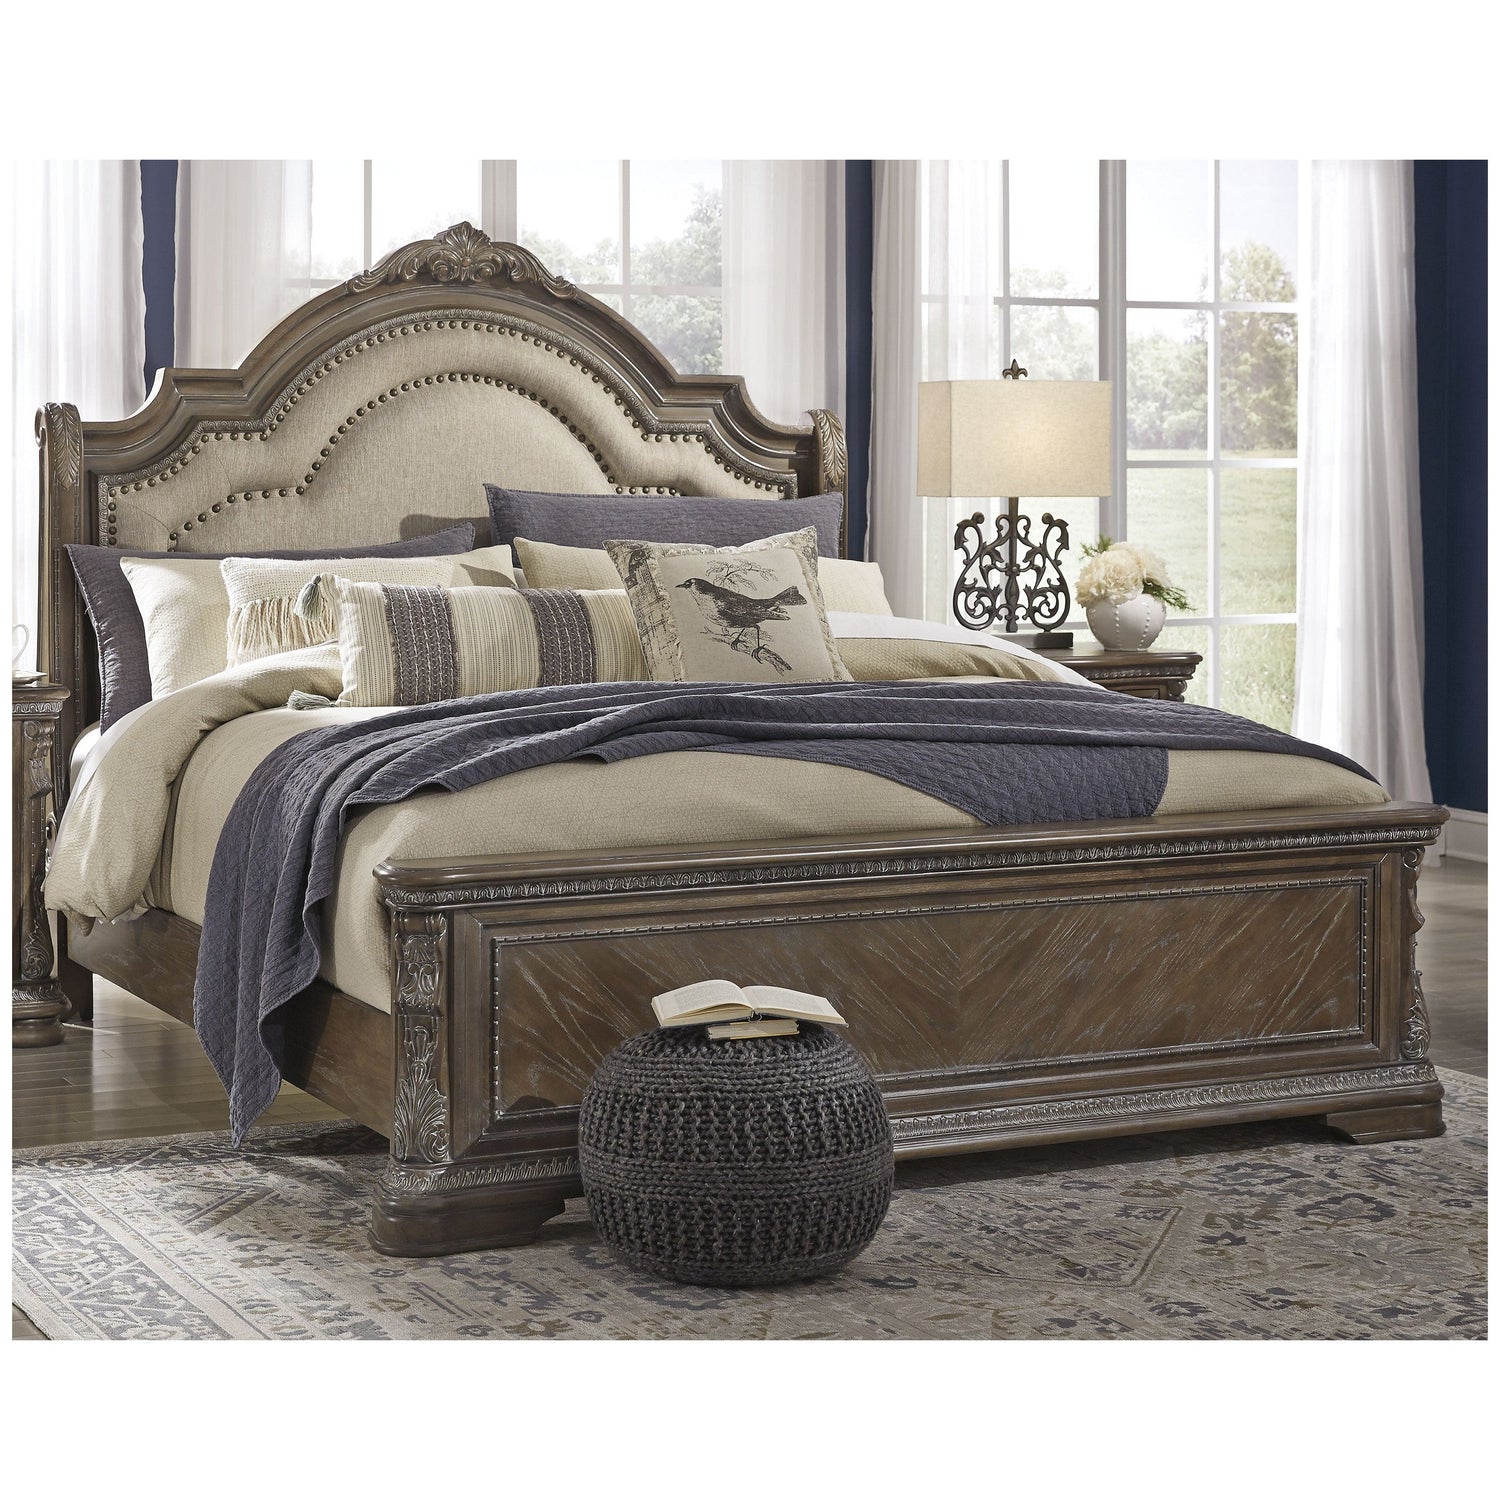 Charmond Upholstered Sleigh Bed